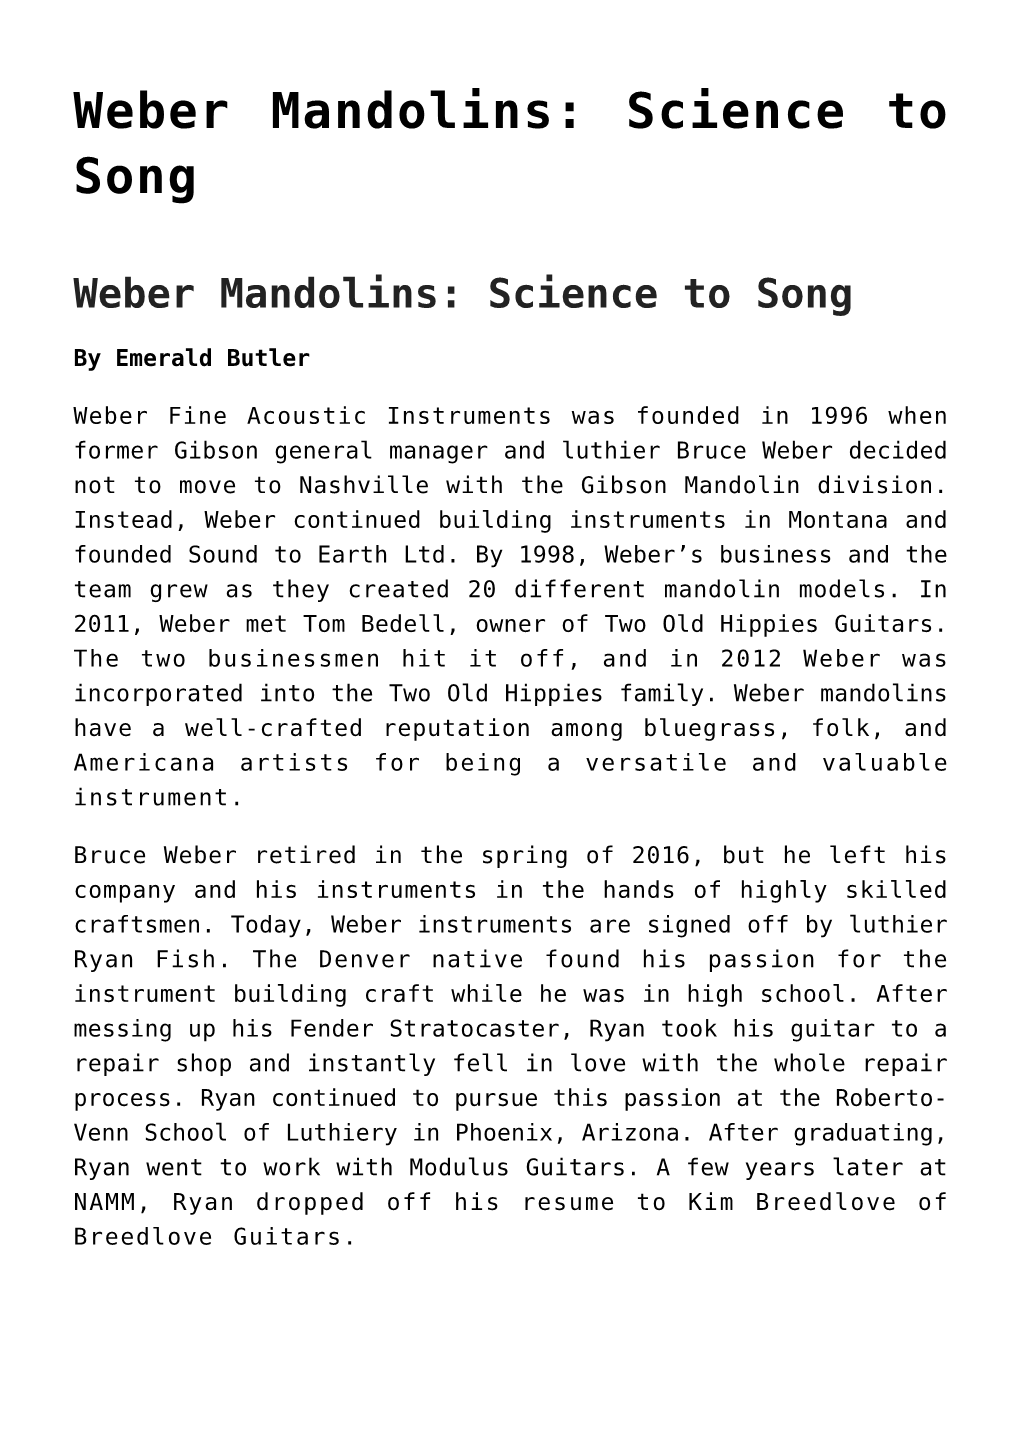 Weber Mandolins: Science to Song